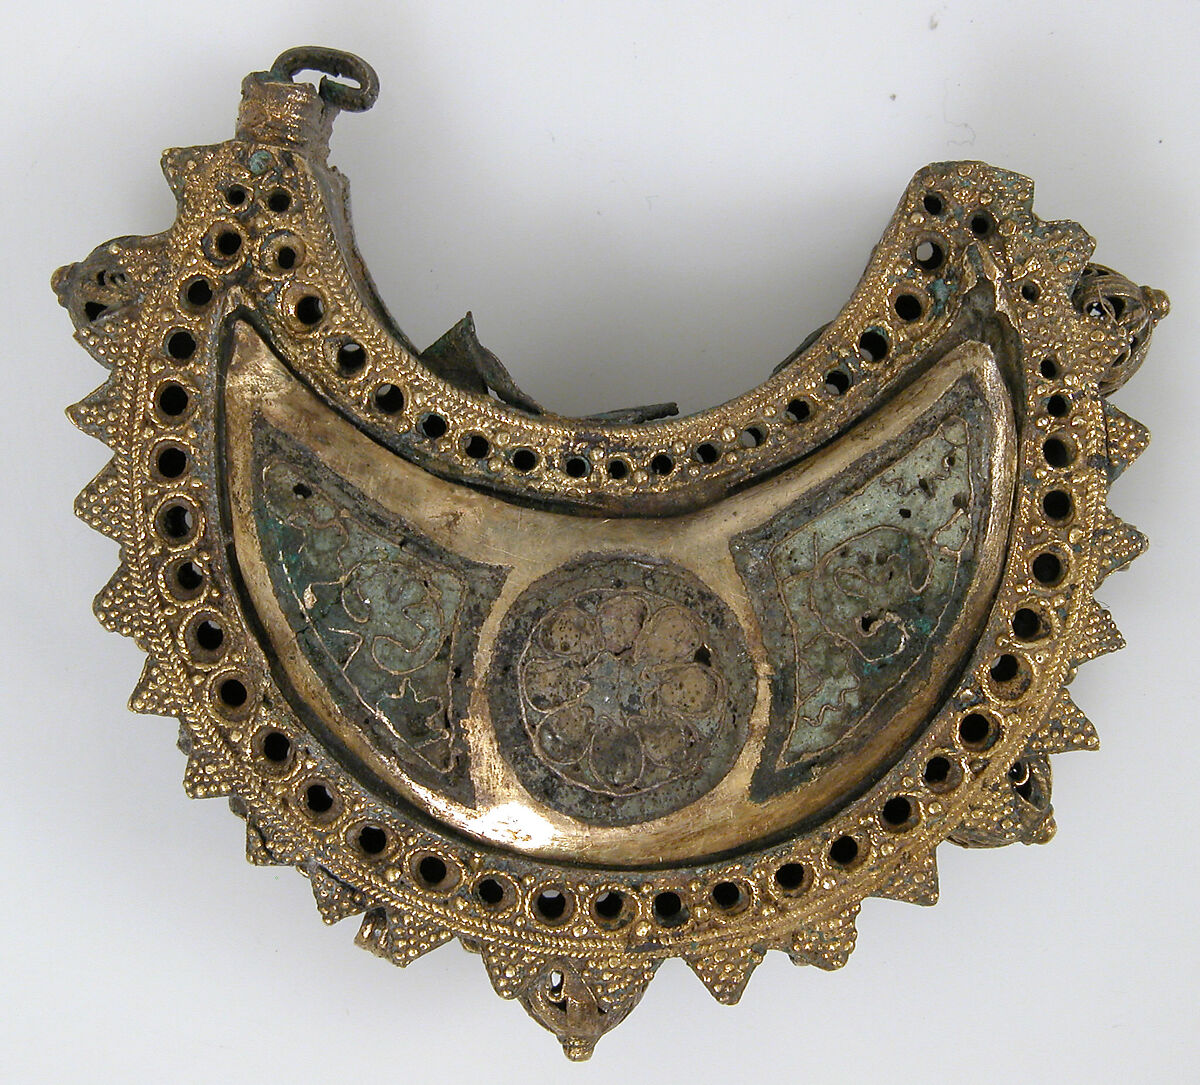 One of a Pair of Crescent-Shaped Earrings with Rosettes | Kyivan Rus ...